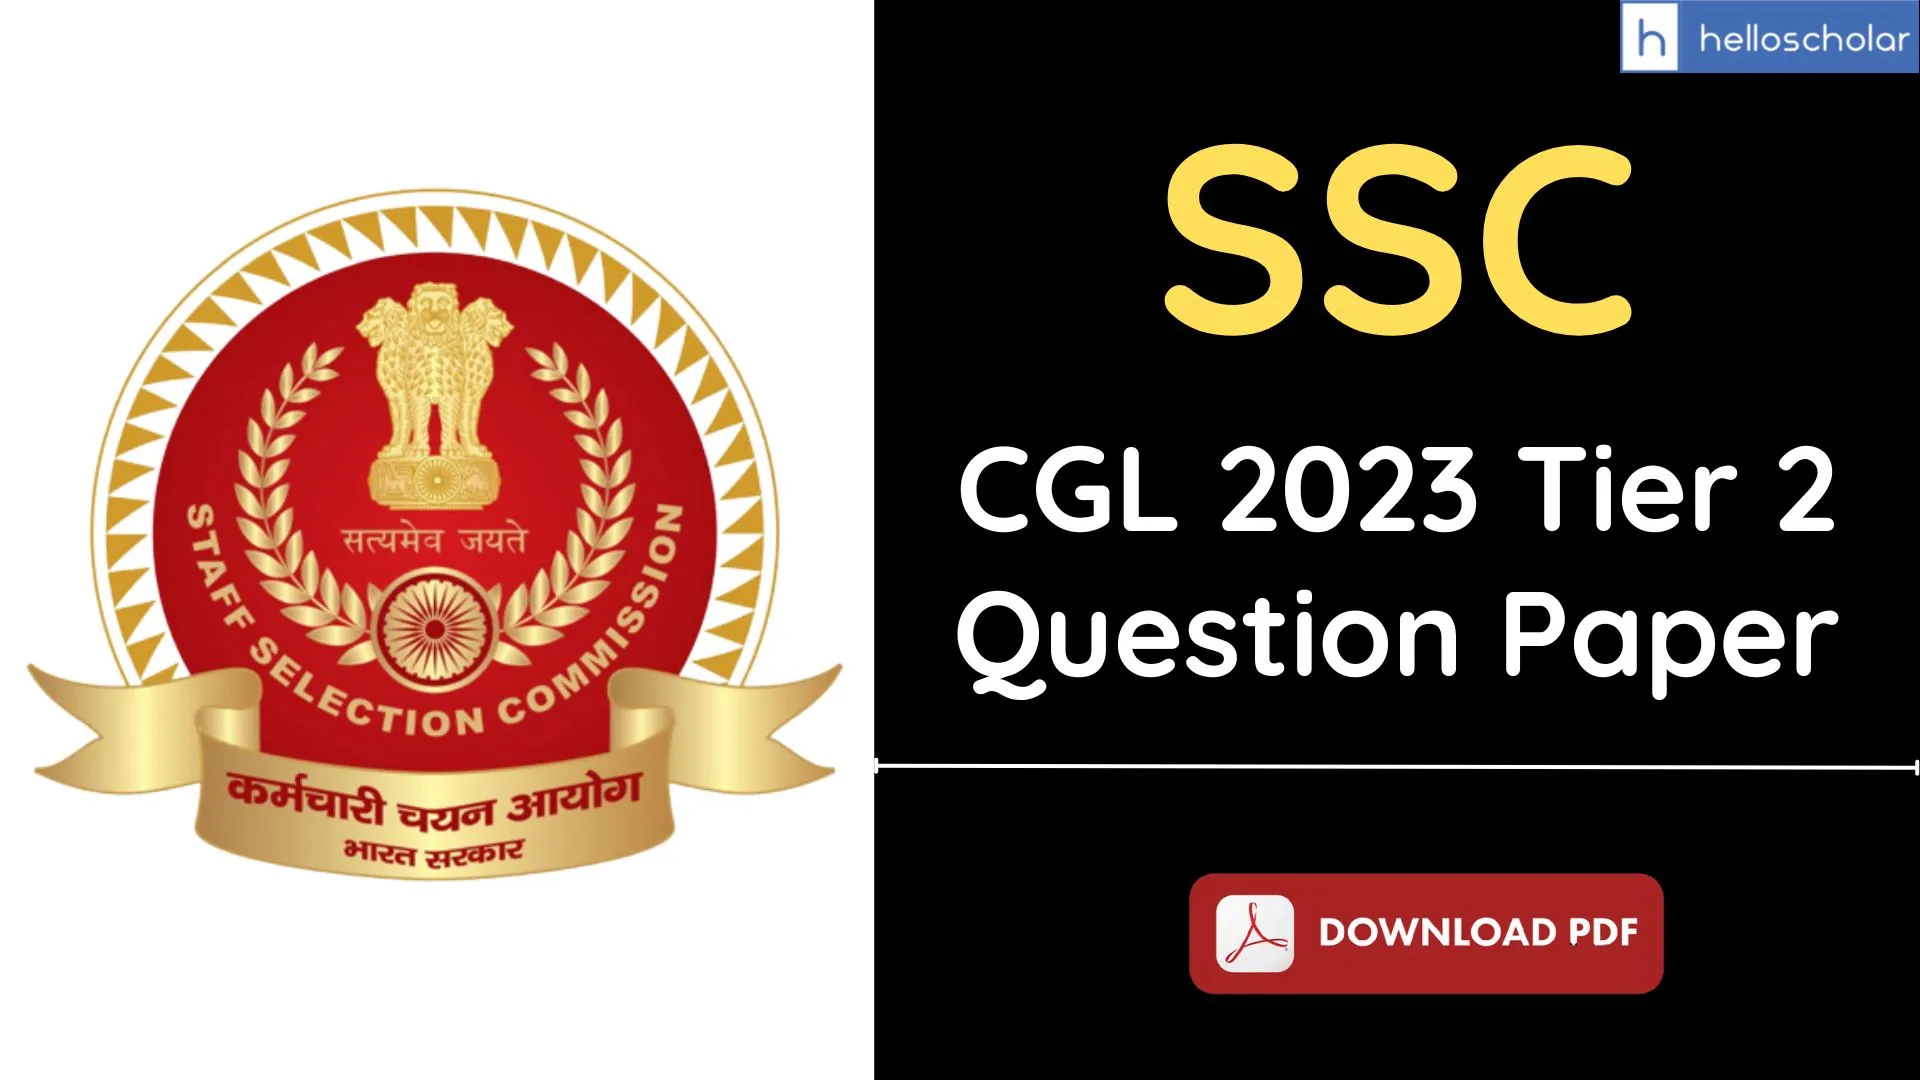 SSC CGL 2023 Tier 2 Solved Question Paper and Answer Key PDF